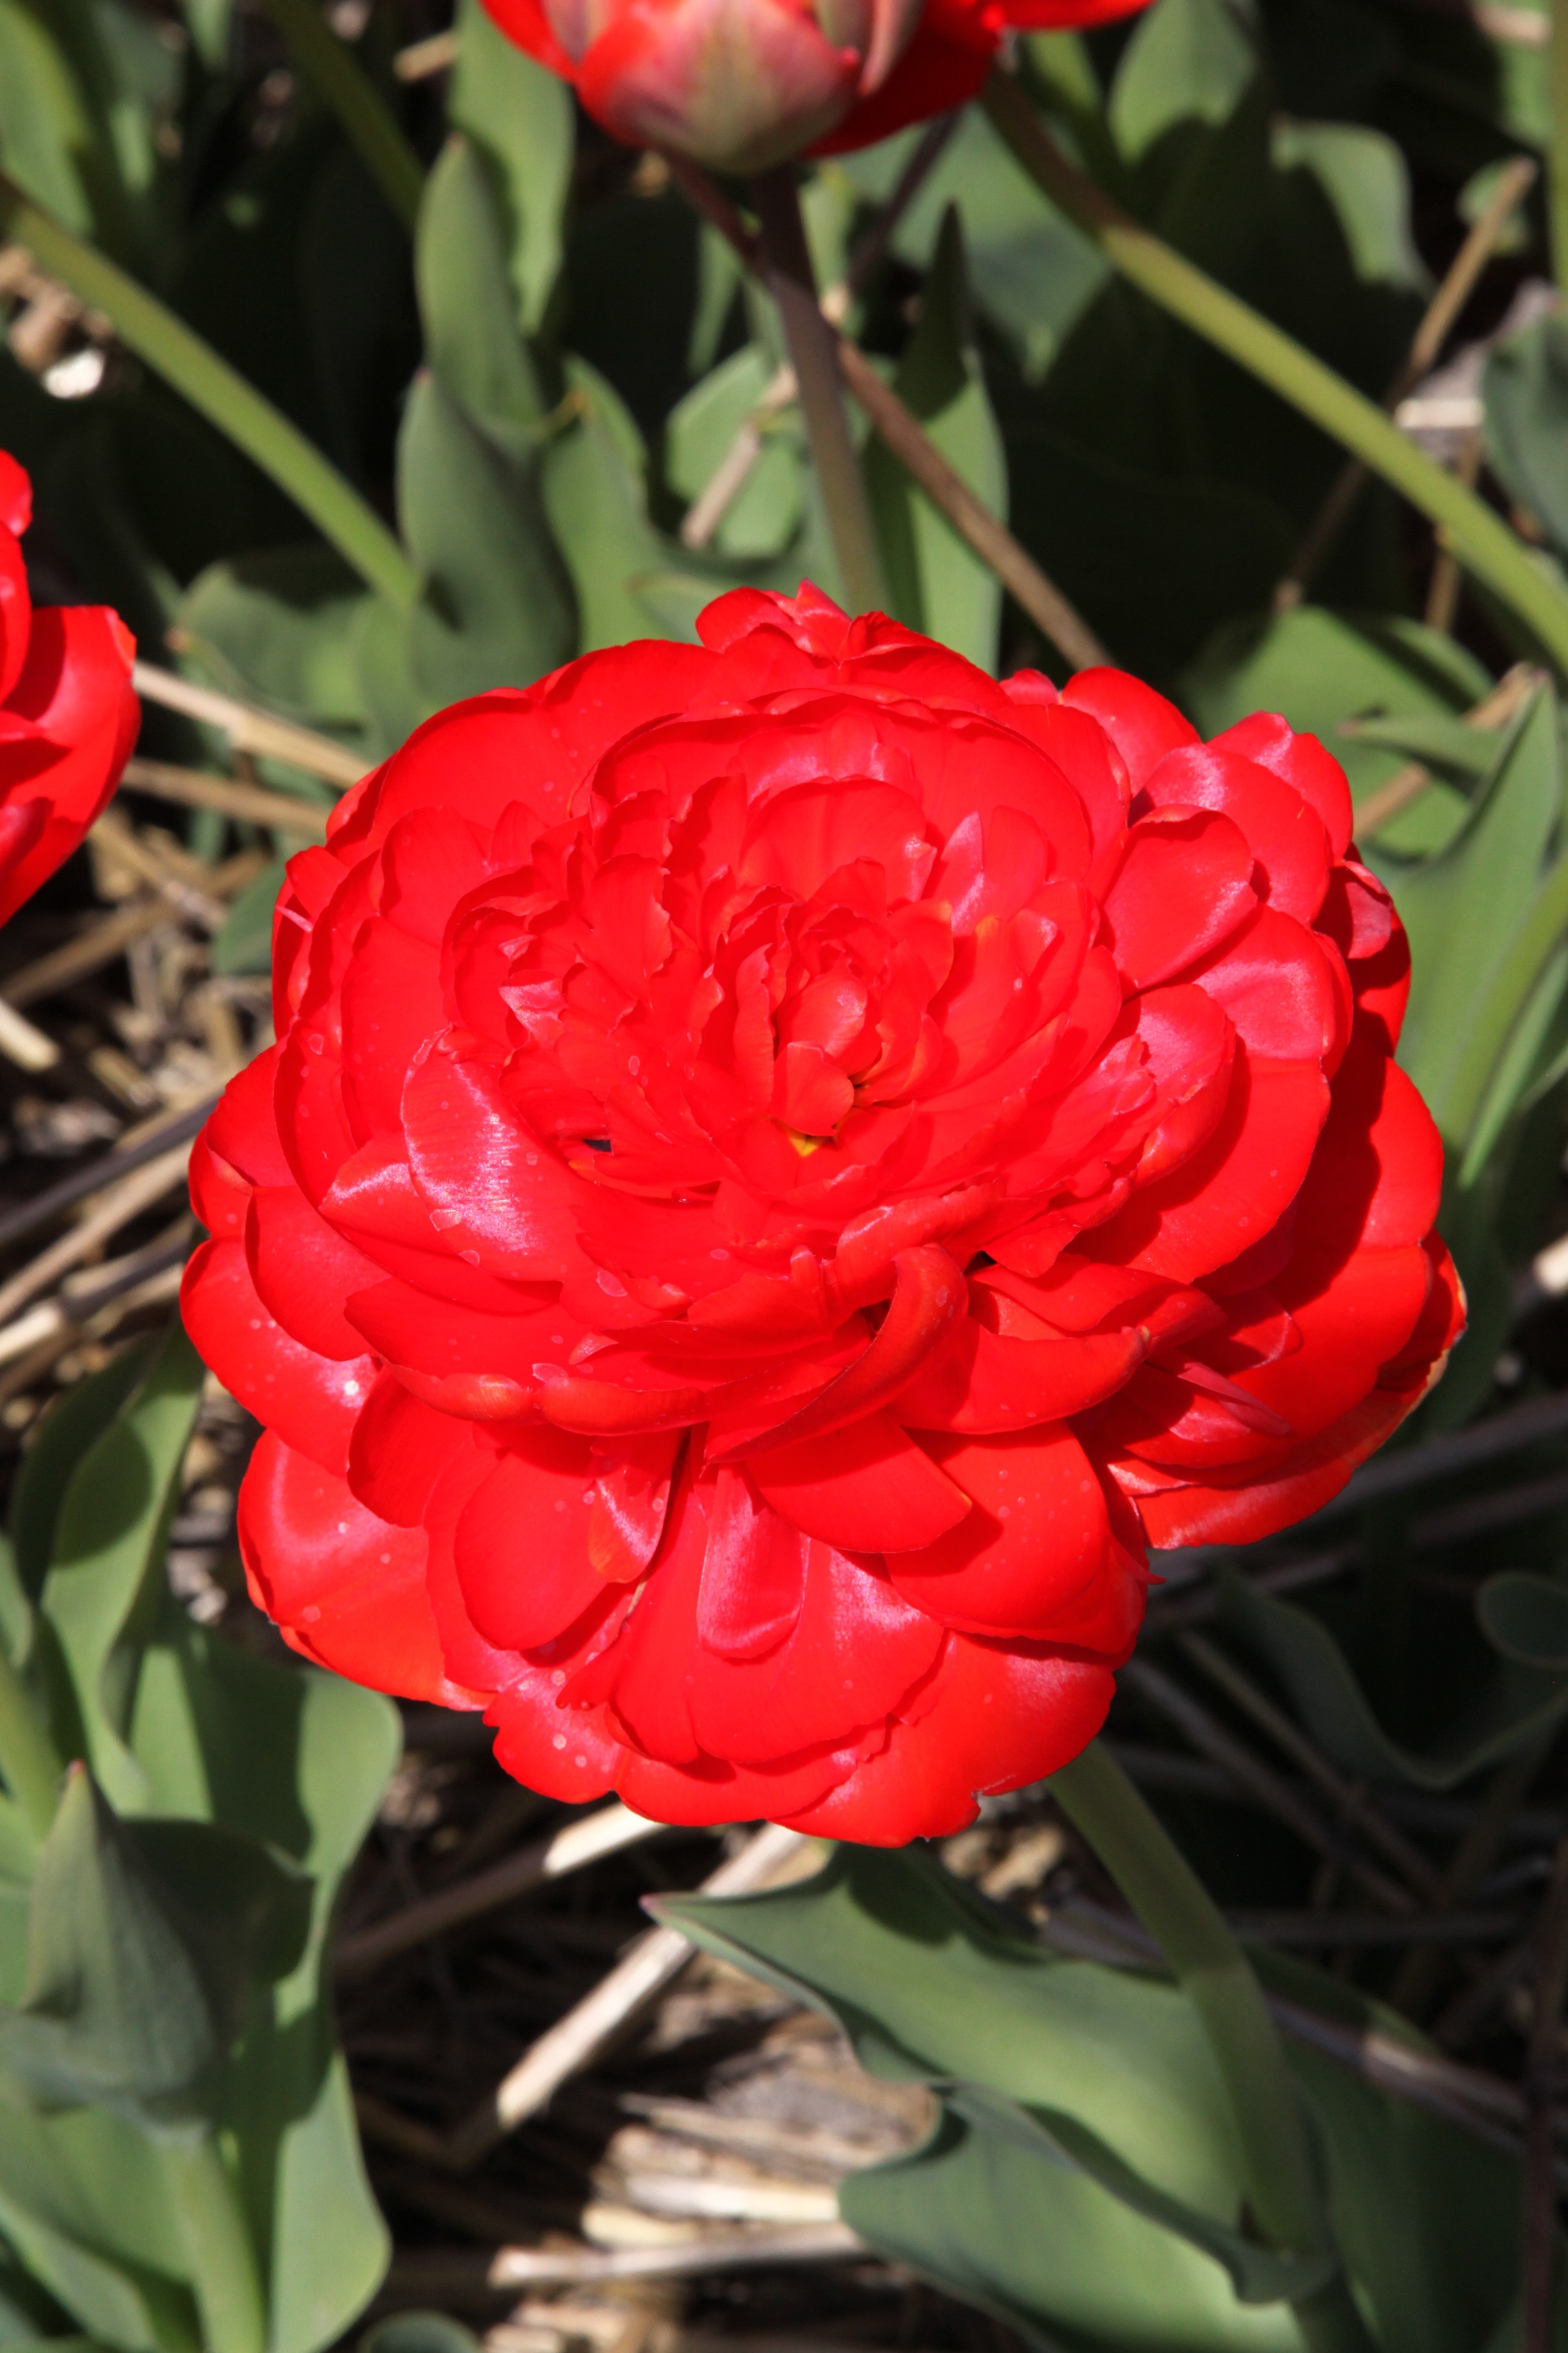 A vibrant red double late tulip named Miranda in full bloom